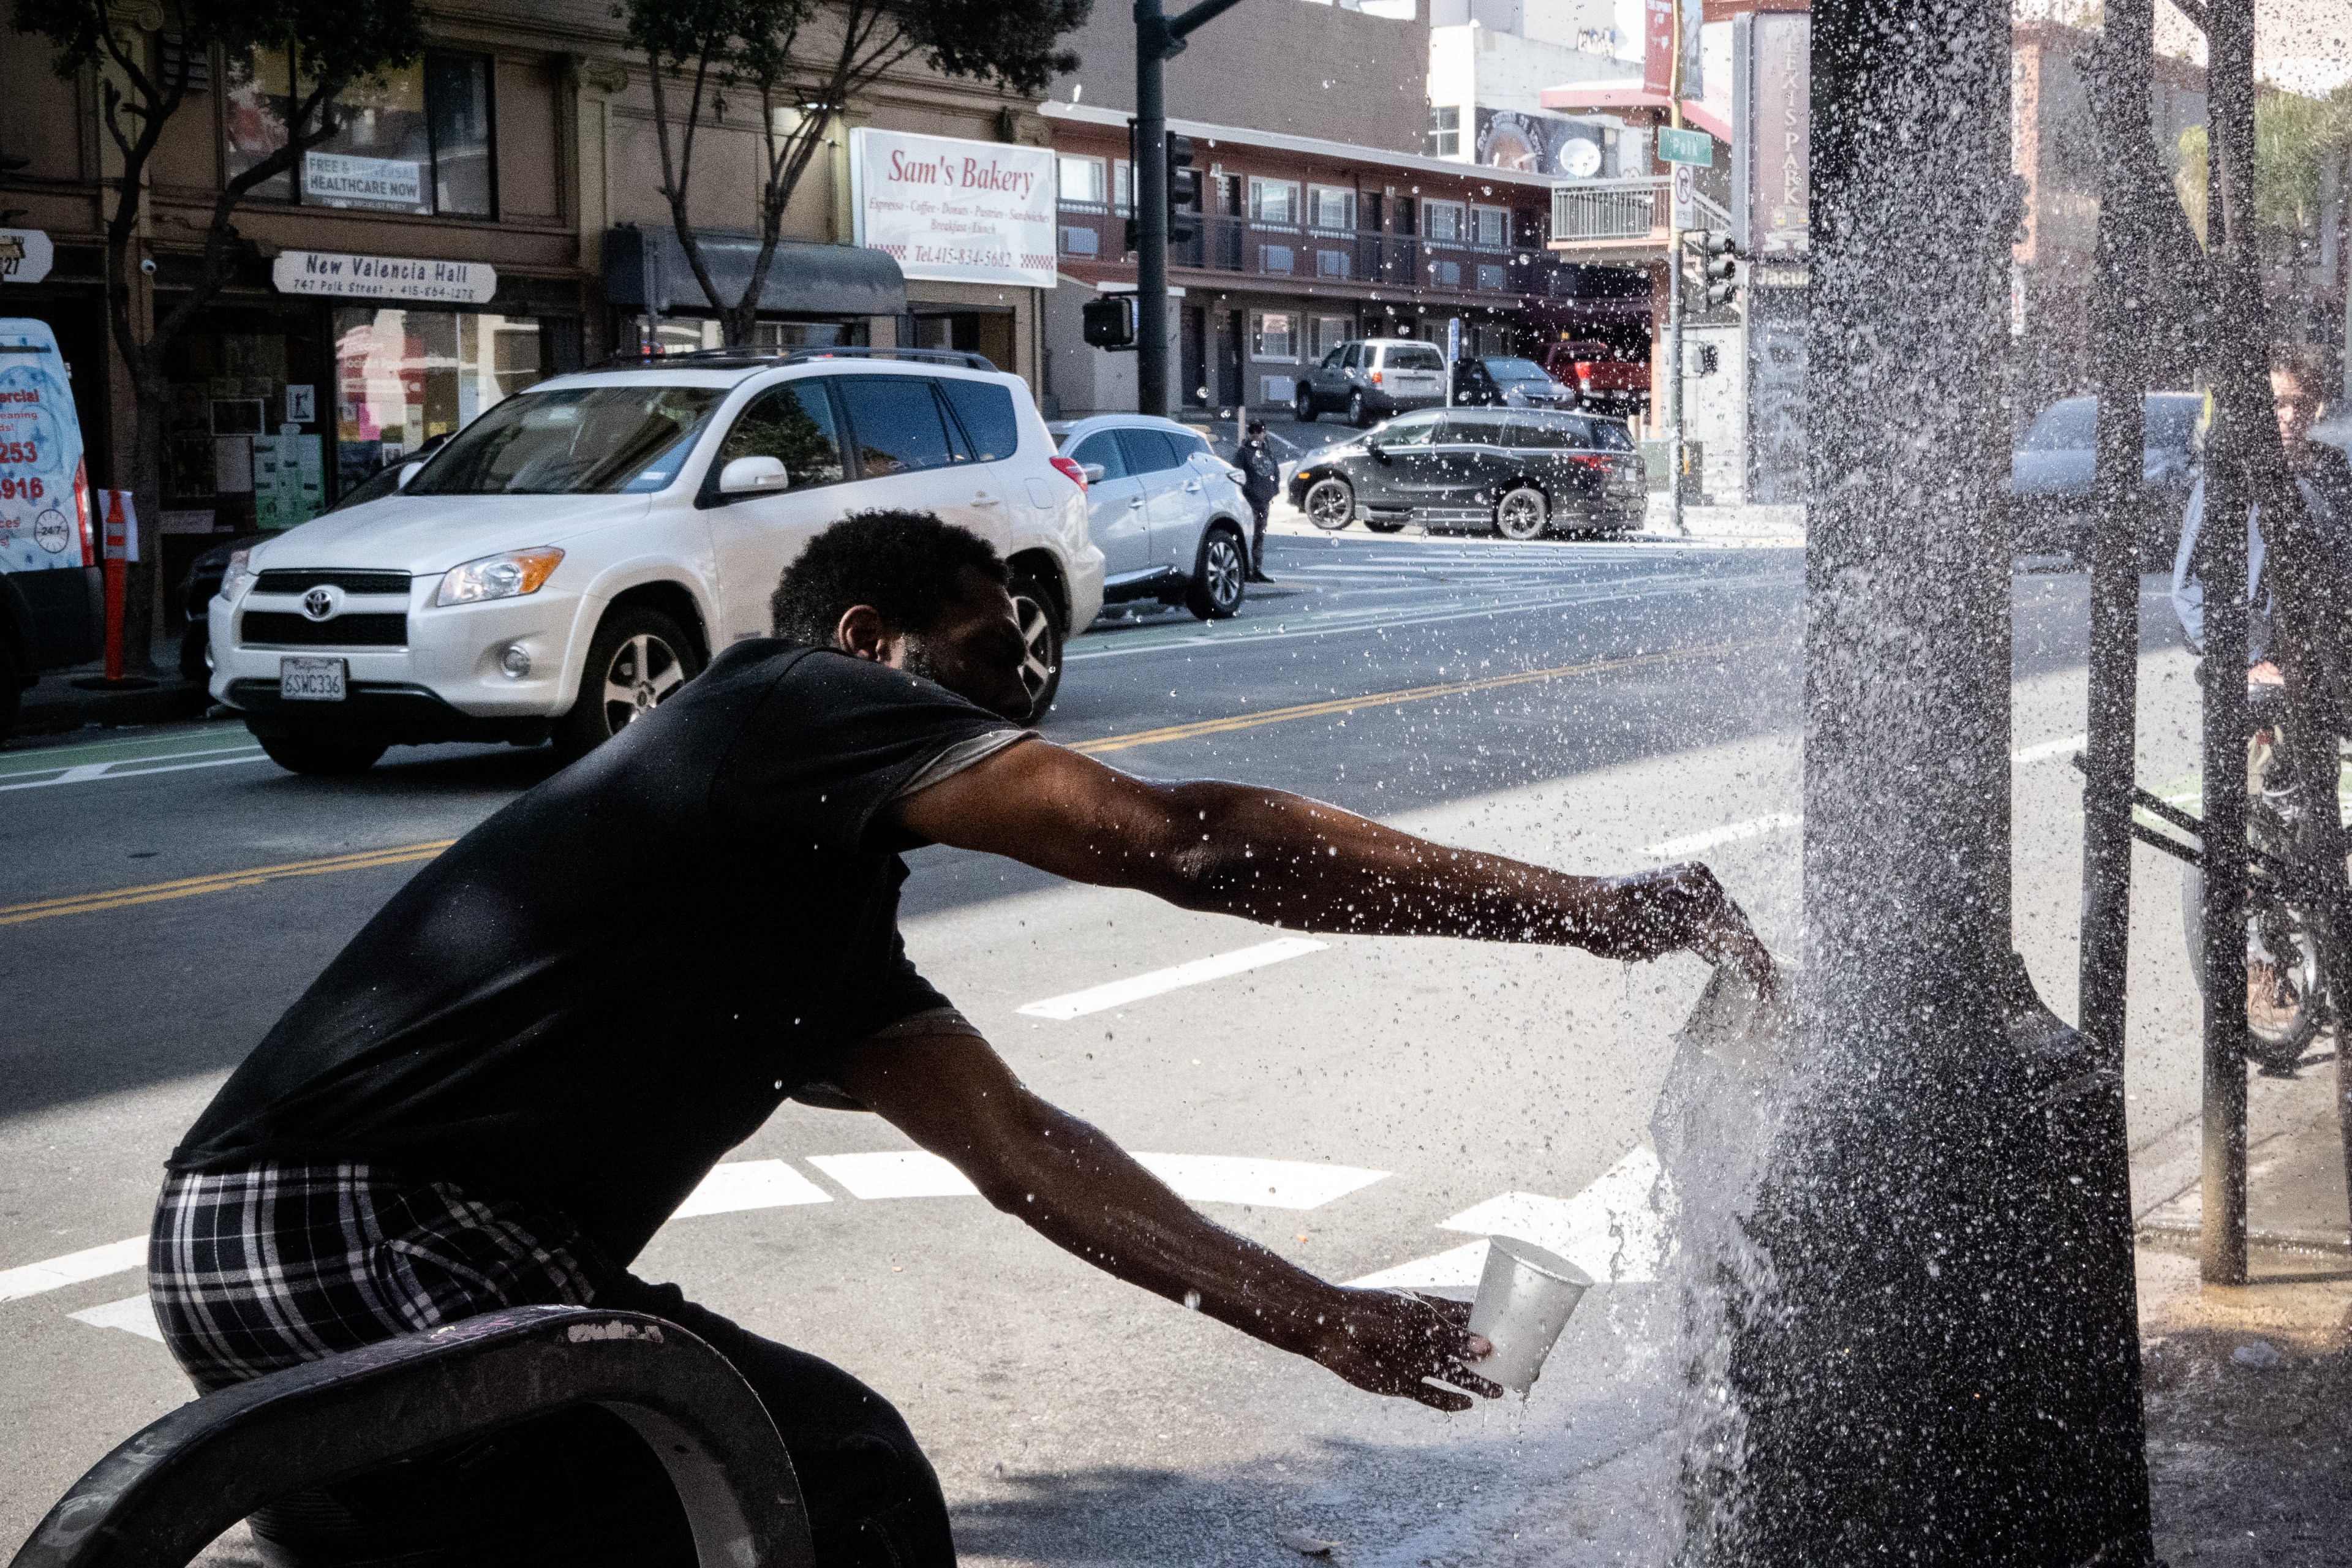 A person is splashing water from a street fountain, with vehicles and city backdrop.